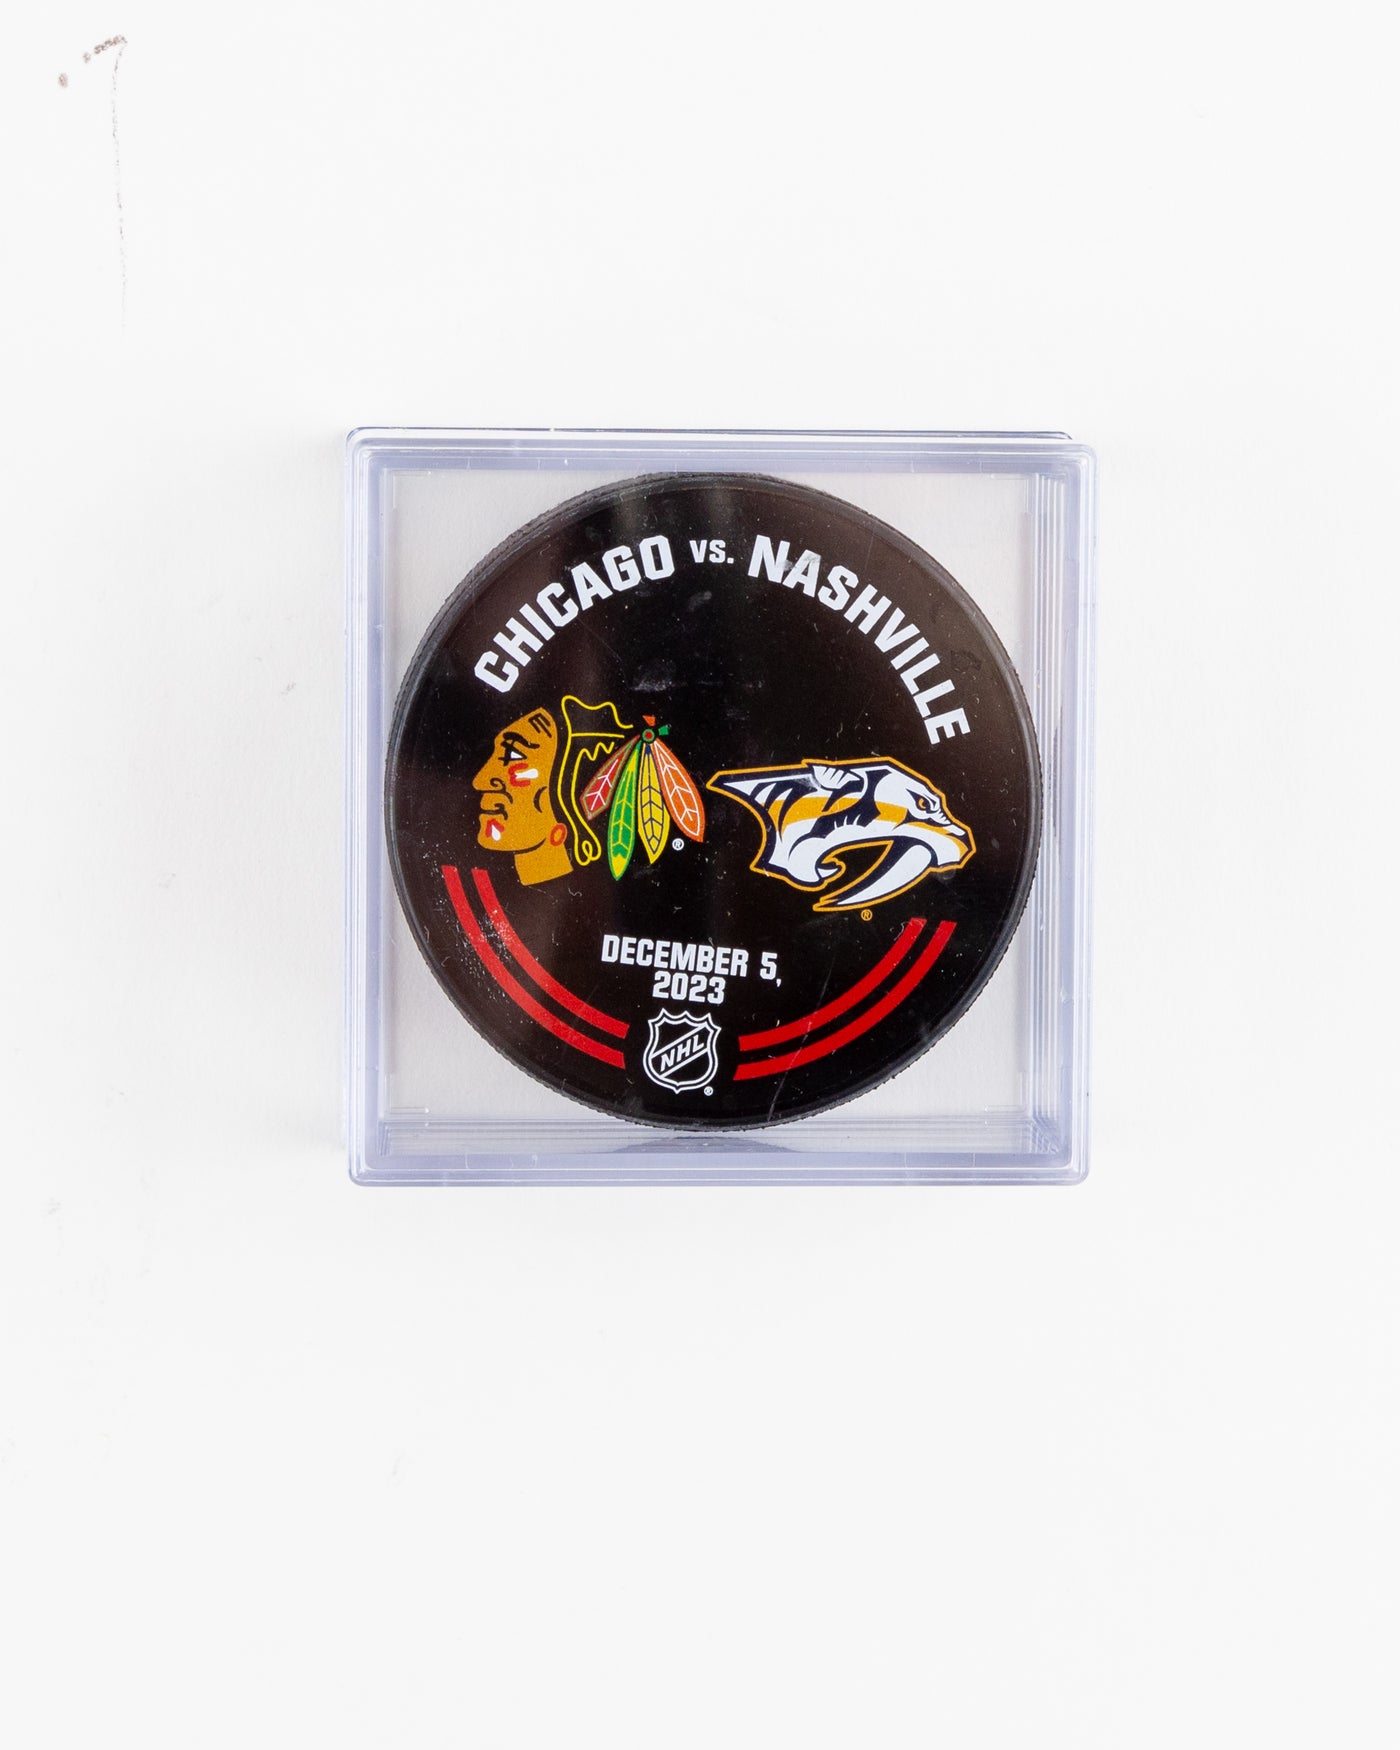 official warm up puck from Chicago Blackhawks vs Nashville Predators game on December5, 2023 - front lay flat